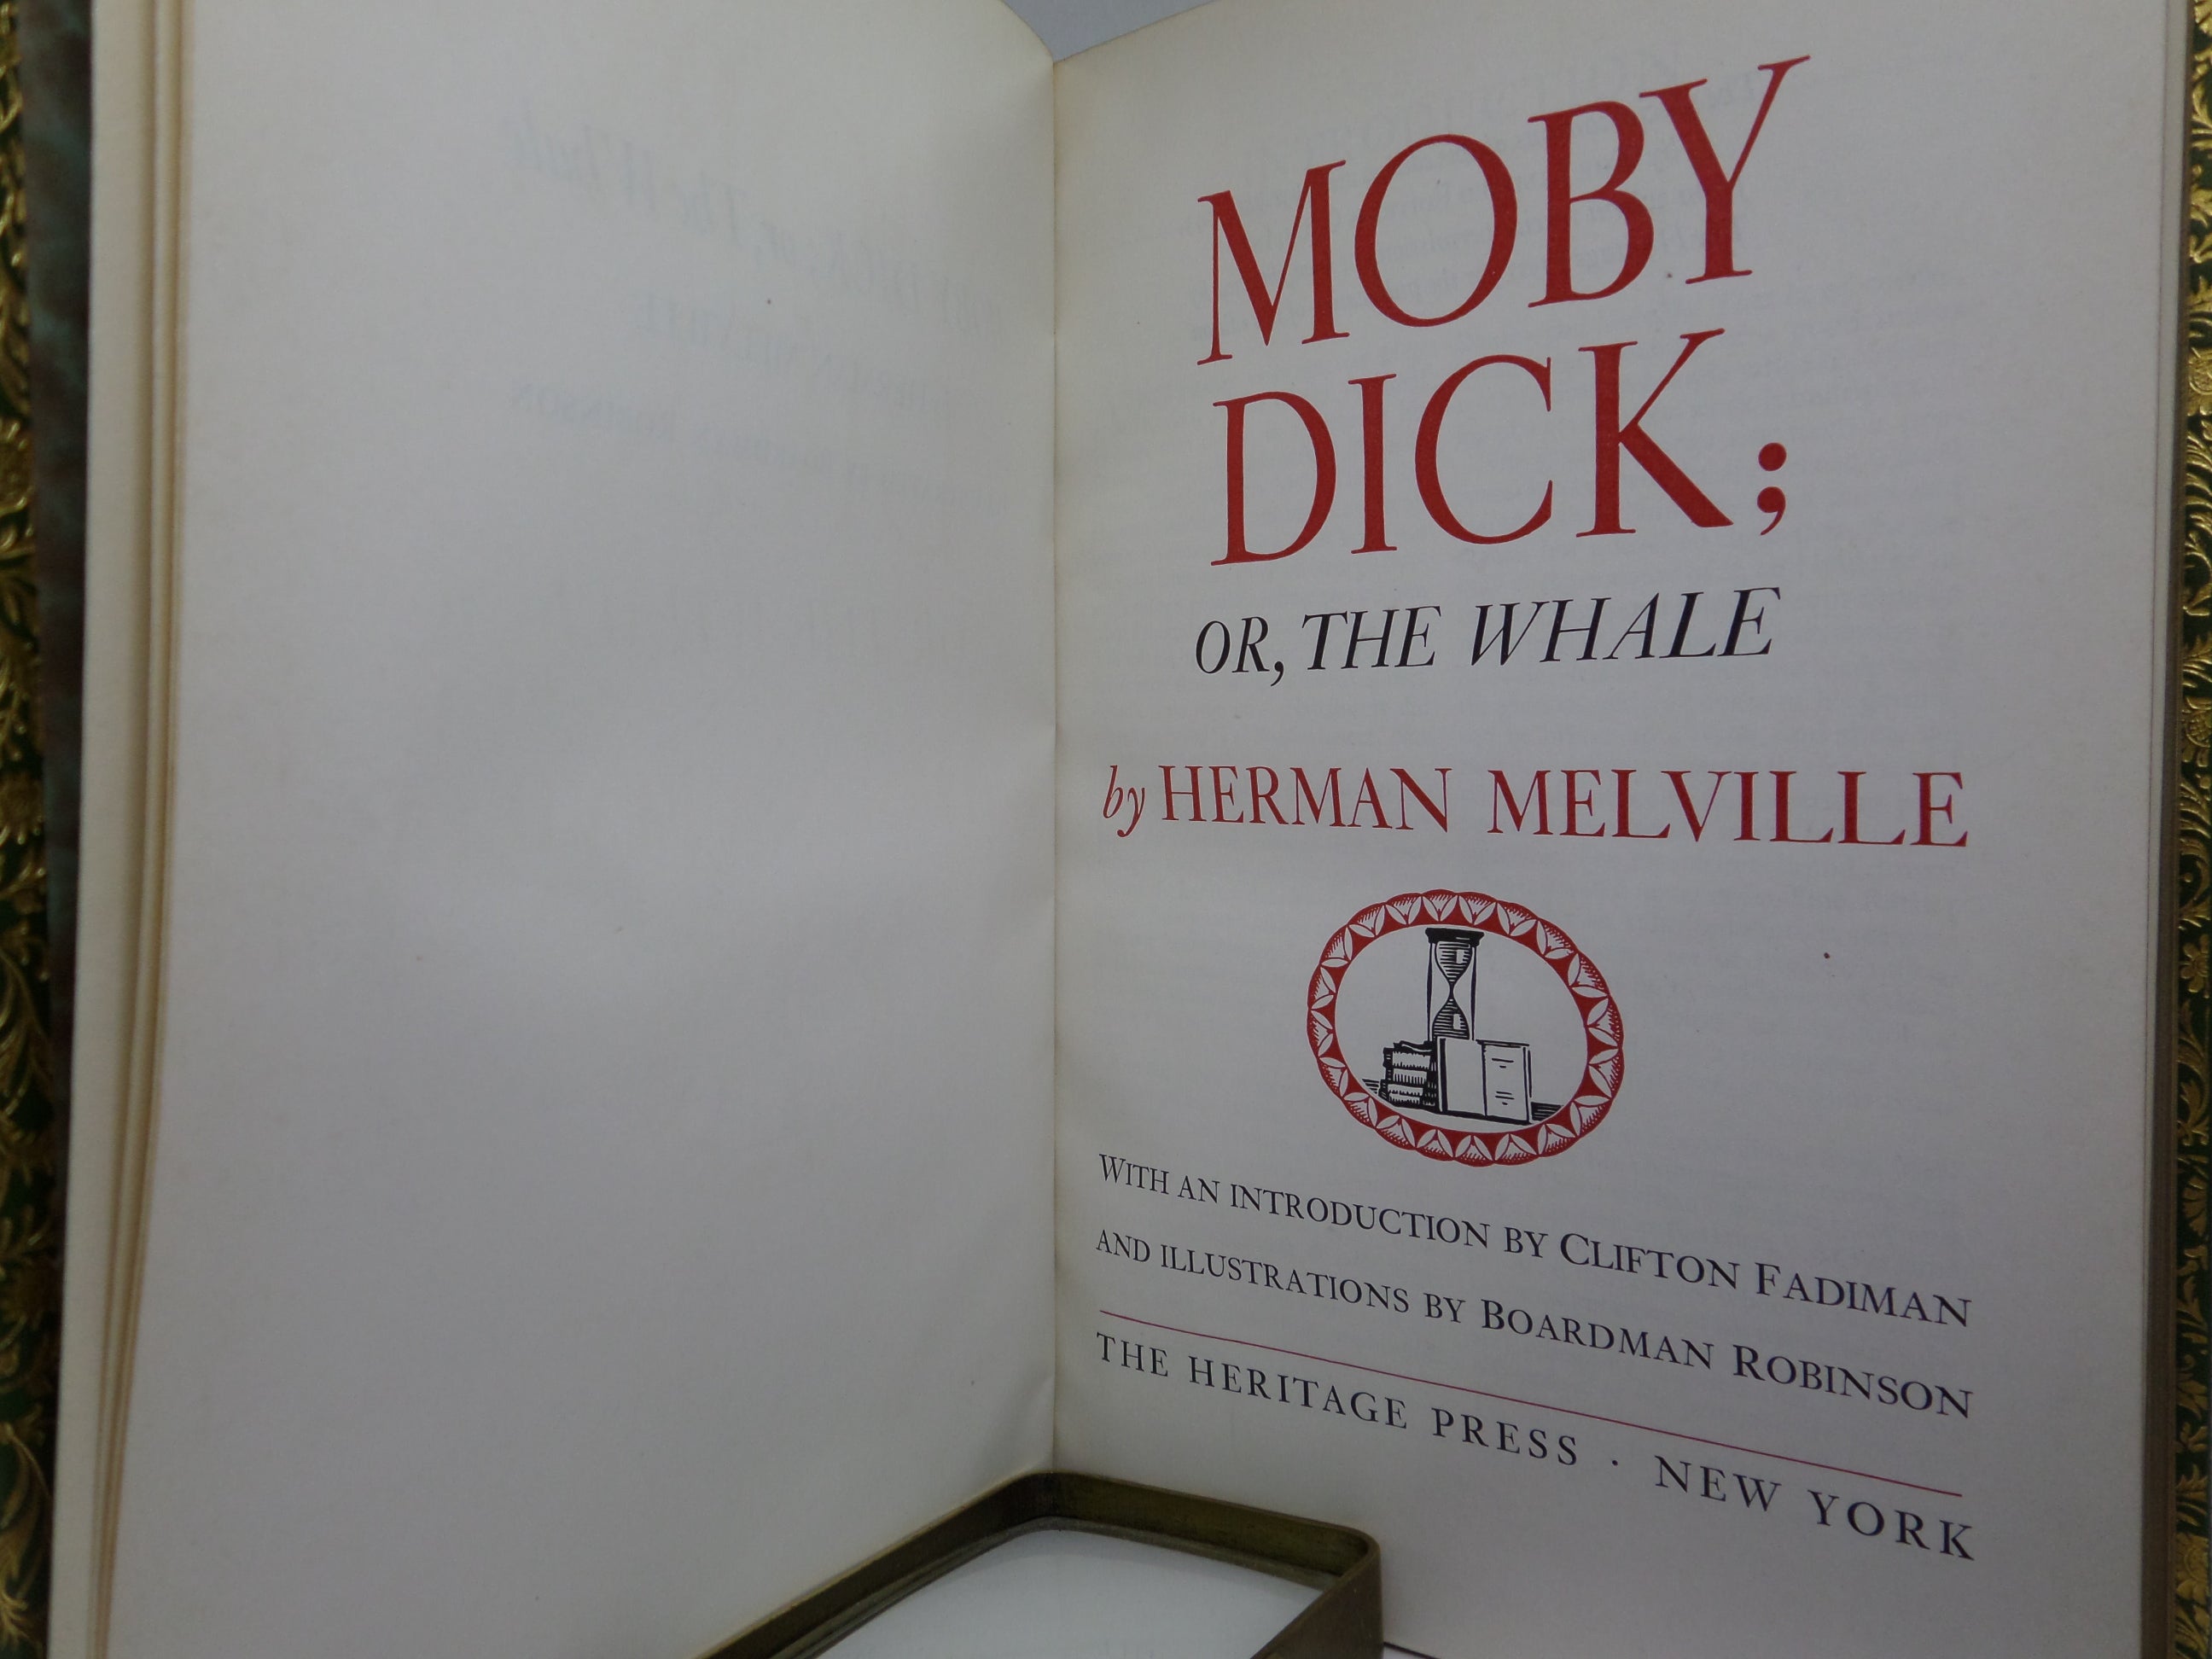 MOBY DICK BY HERMAN MELVILLE 1943 FINE LEATHER BINDING BY BAYNTUN